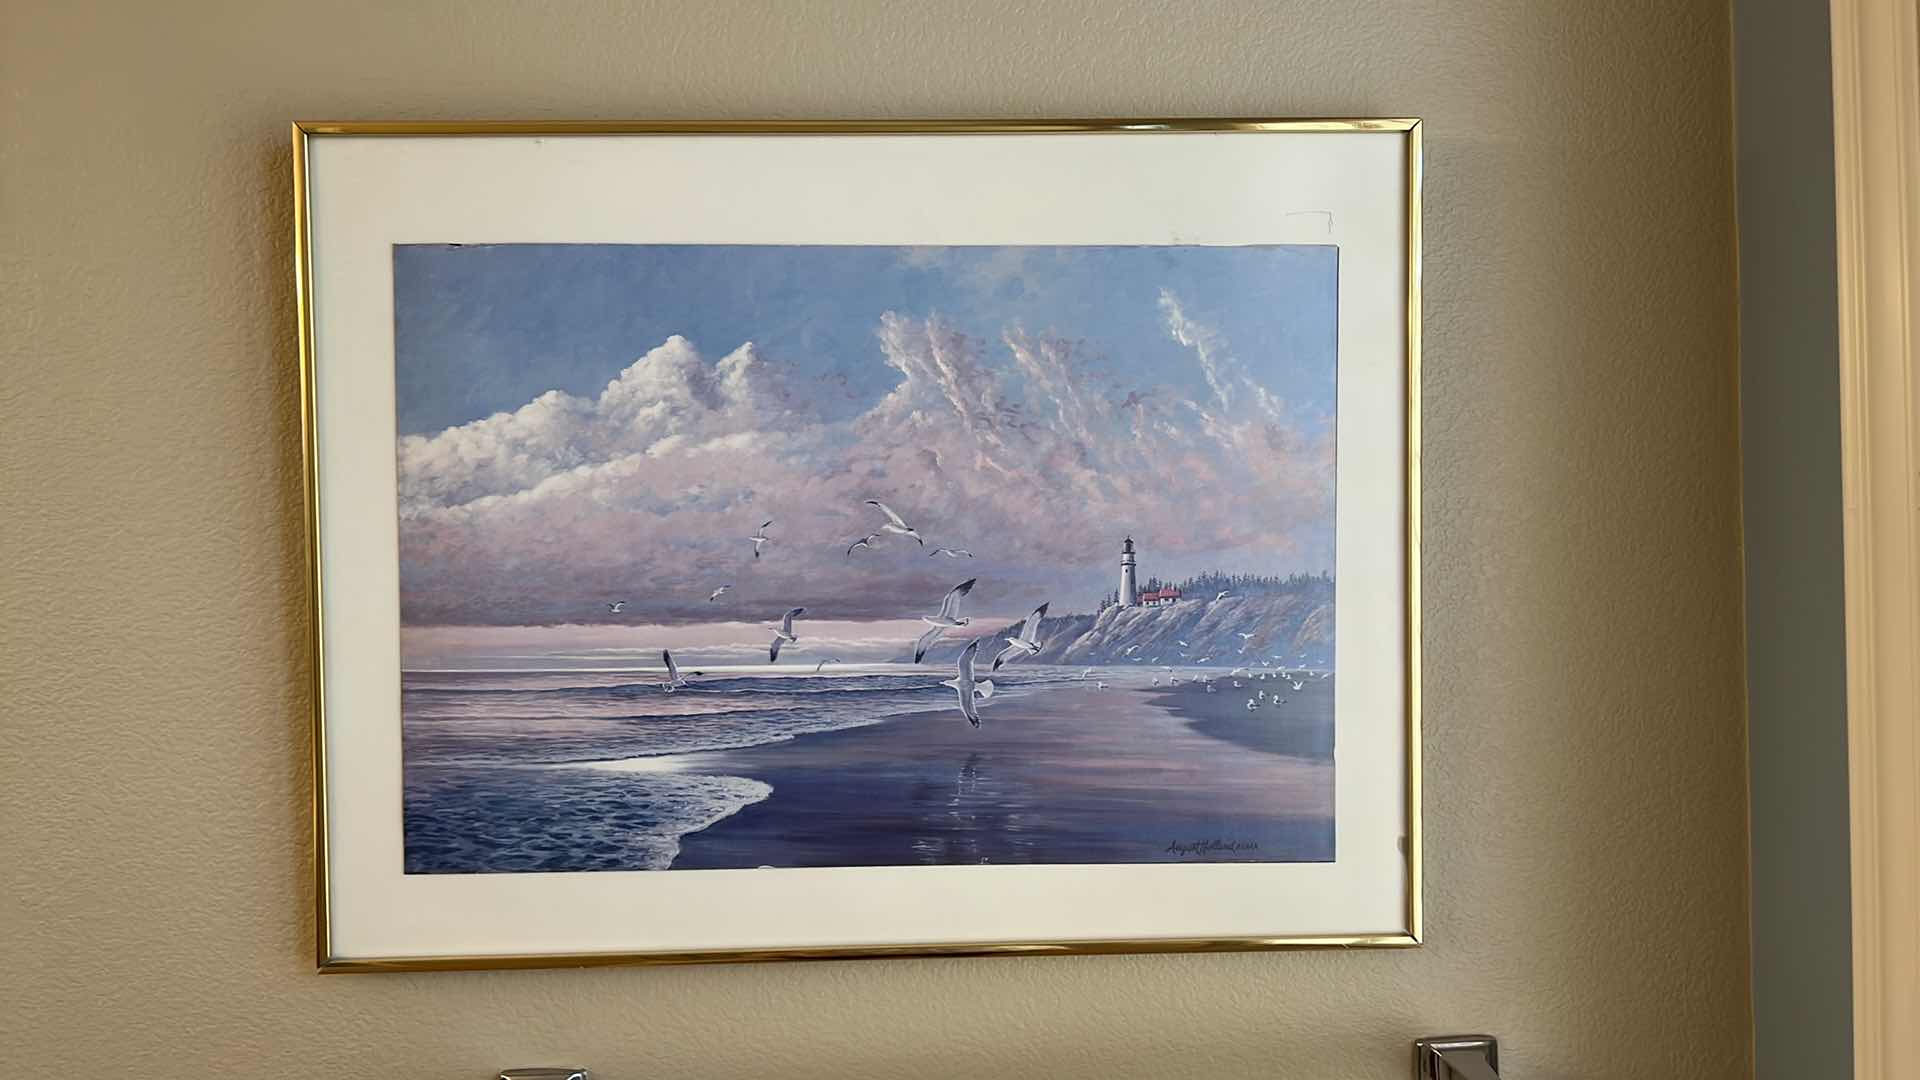 Photo 1 of FRAMED SEAGULLS BY THE SEA ARTWORK ARTIST SIGNED 28” x 21”